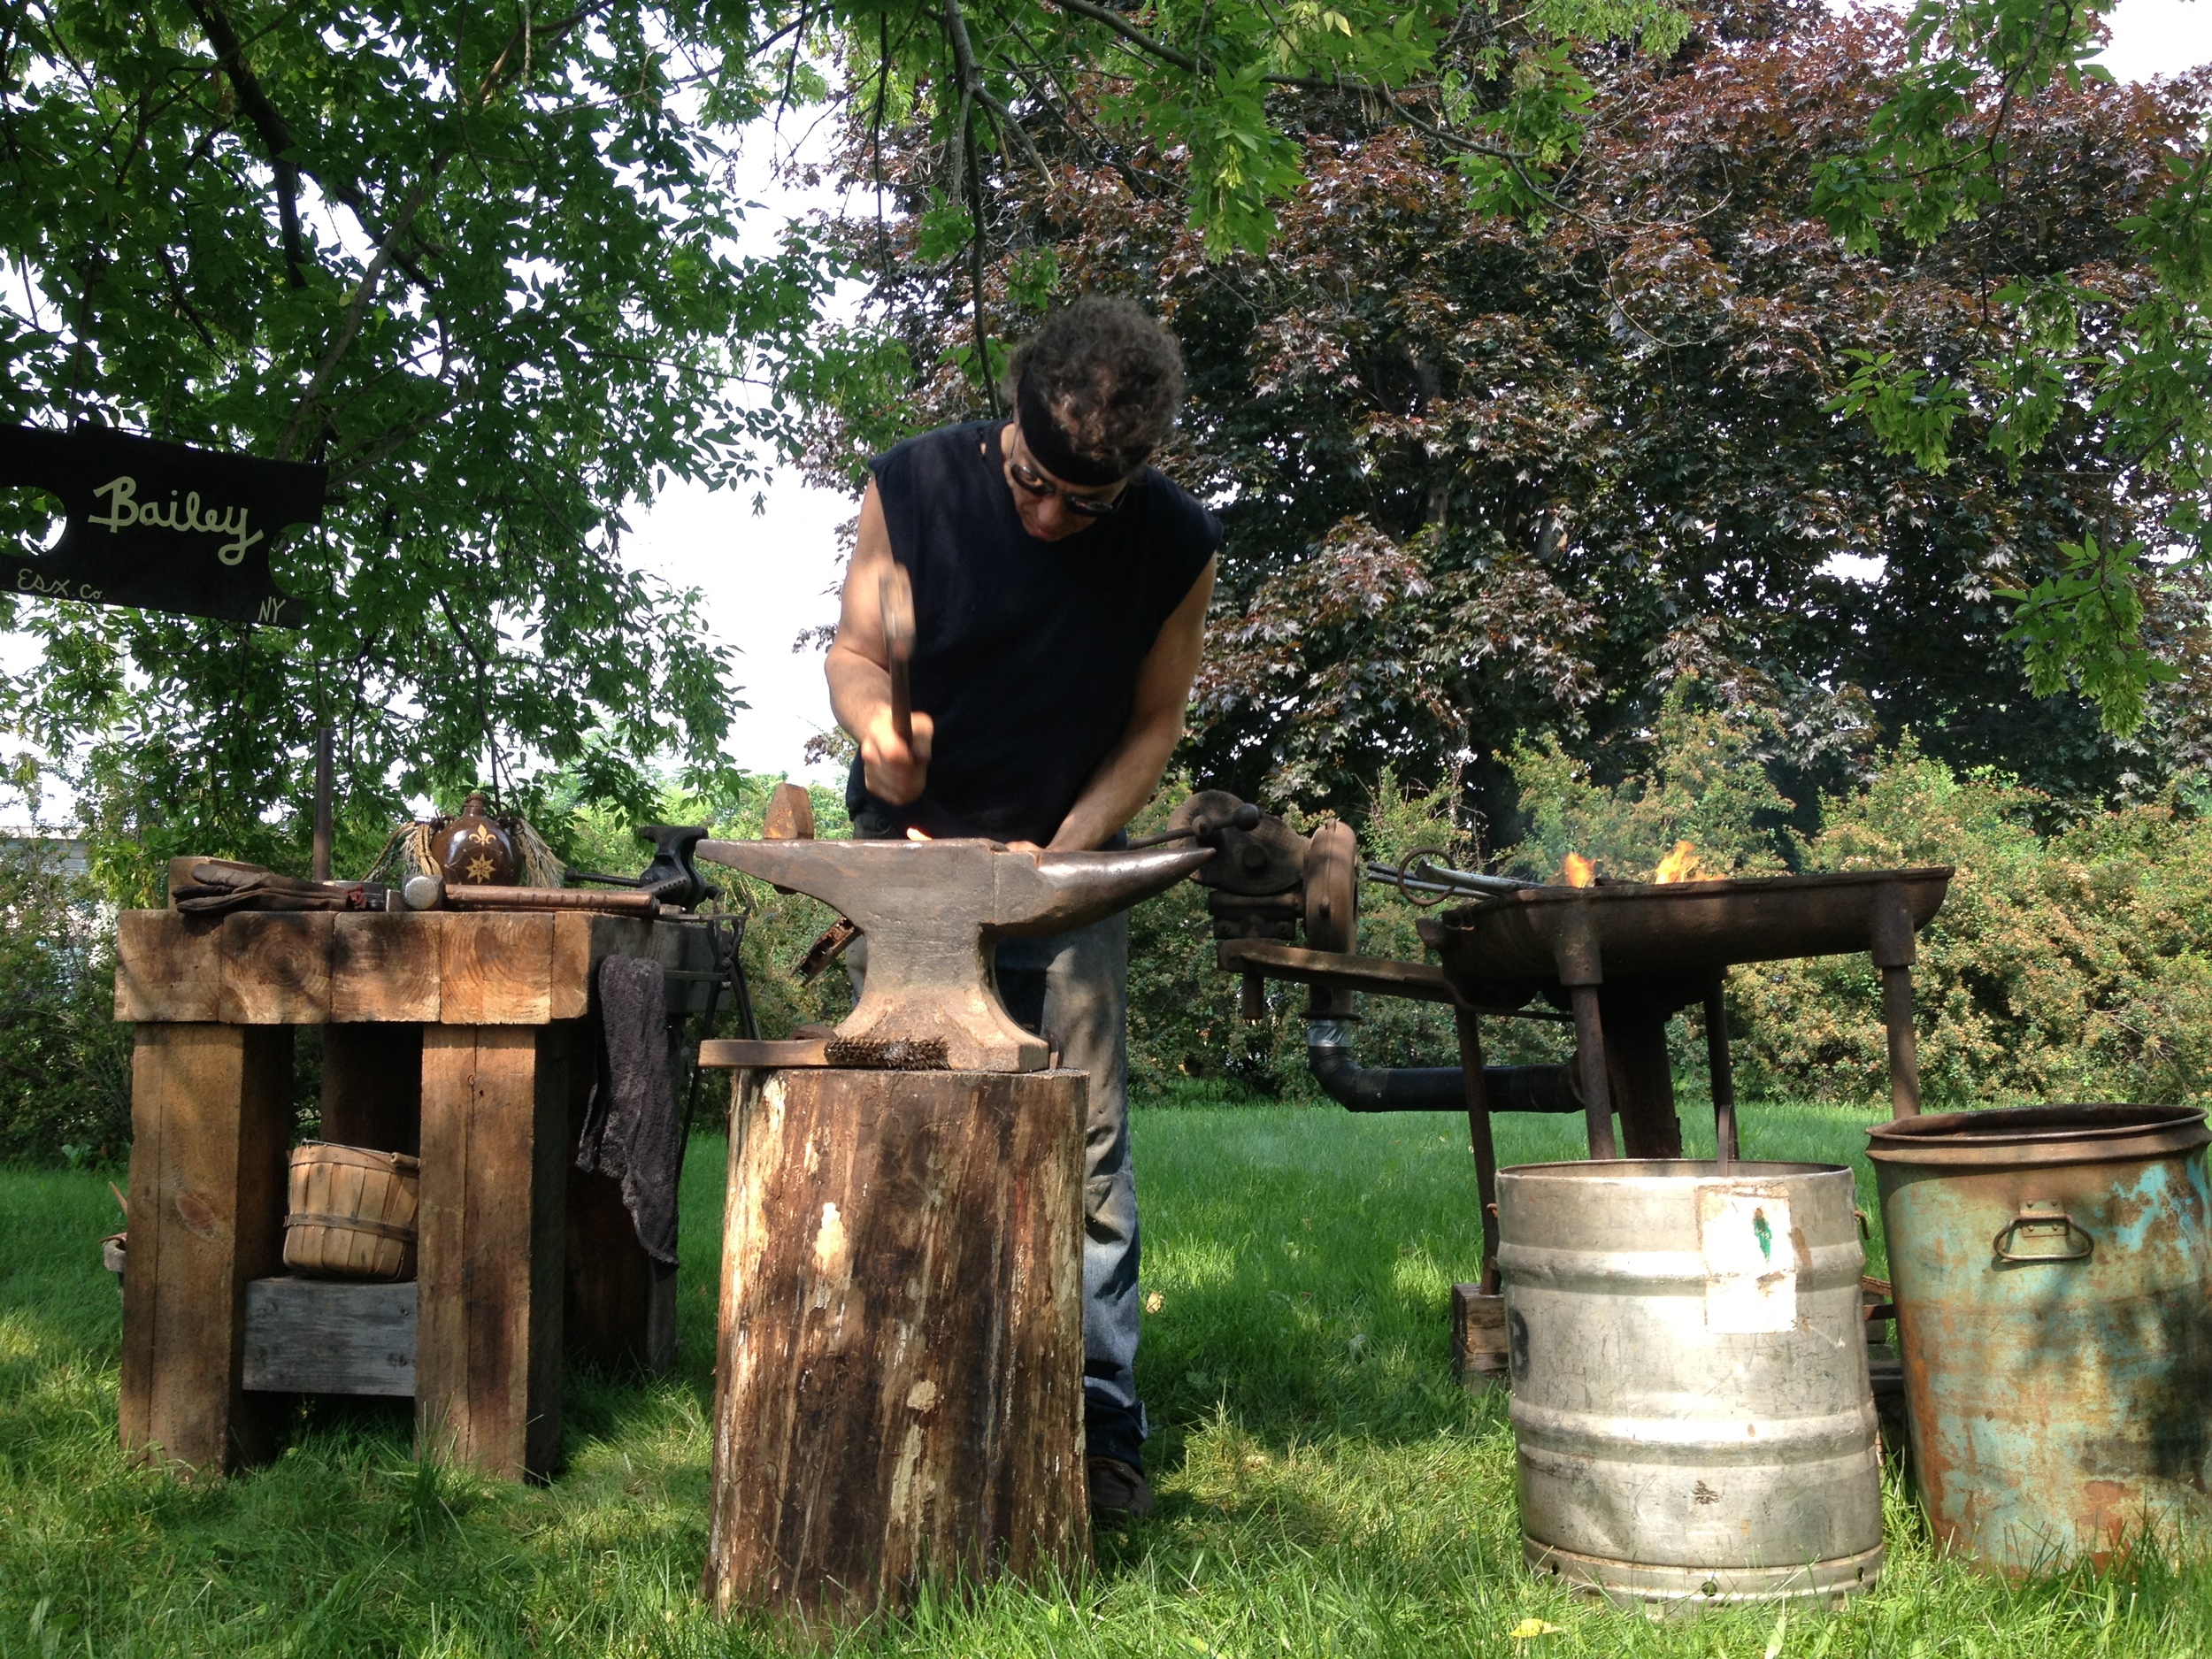  While making a knife blade from an old file, Russ enlightened us on the relative merits of different kinds of steel and iron, the ease of setting up your own small forge on a farm, and the vast superiority of old tools. A fascinating way to end a fa